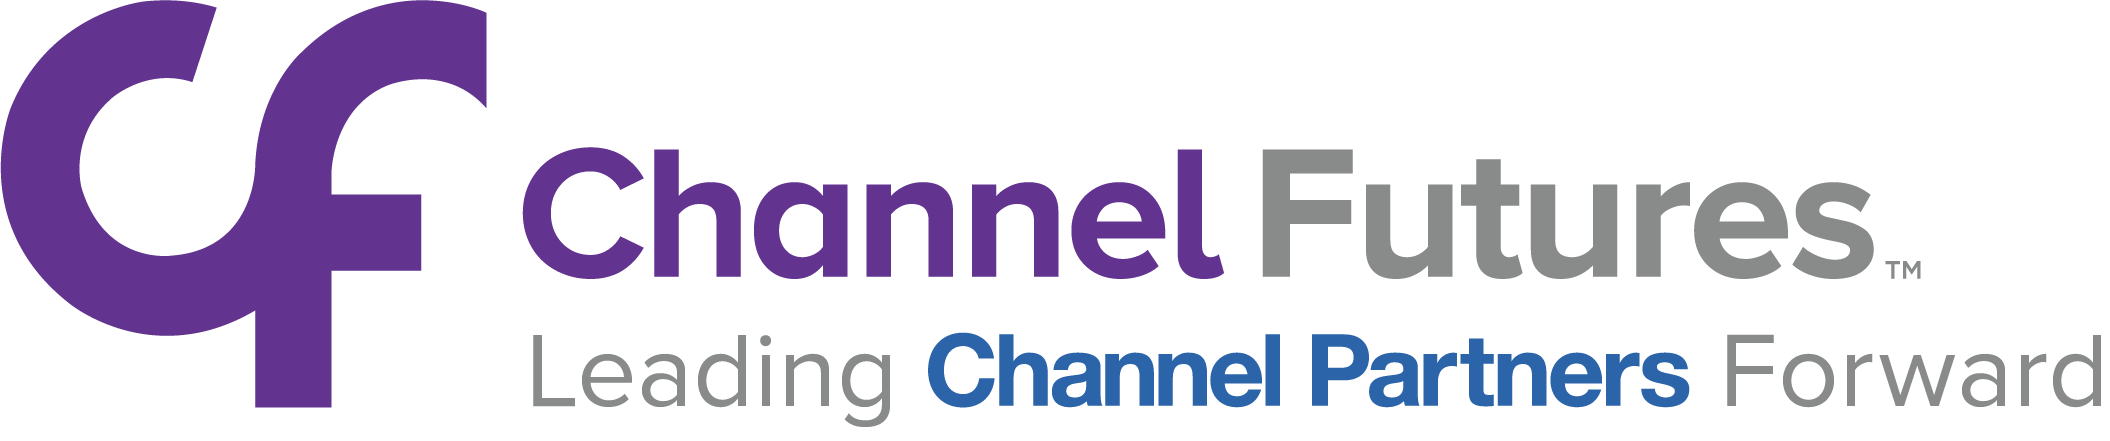 Channel Futures Leading Channel Partners Forward